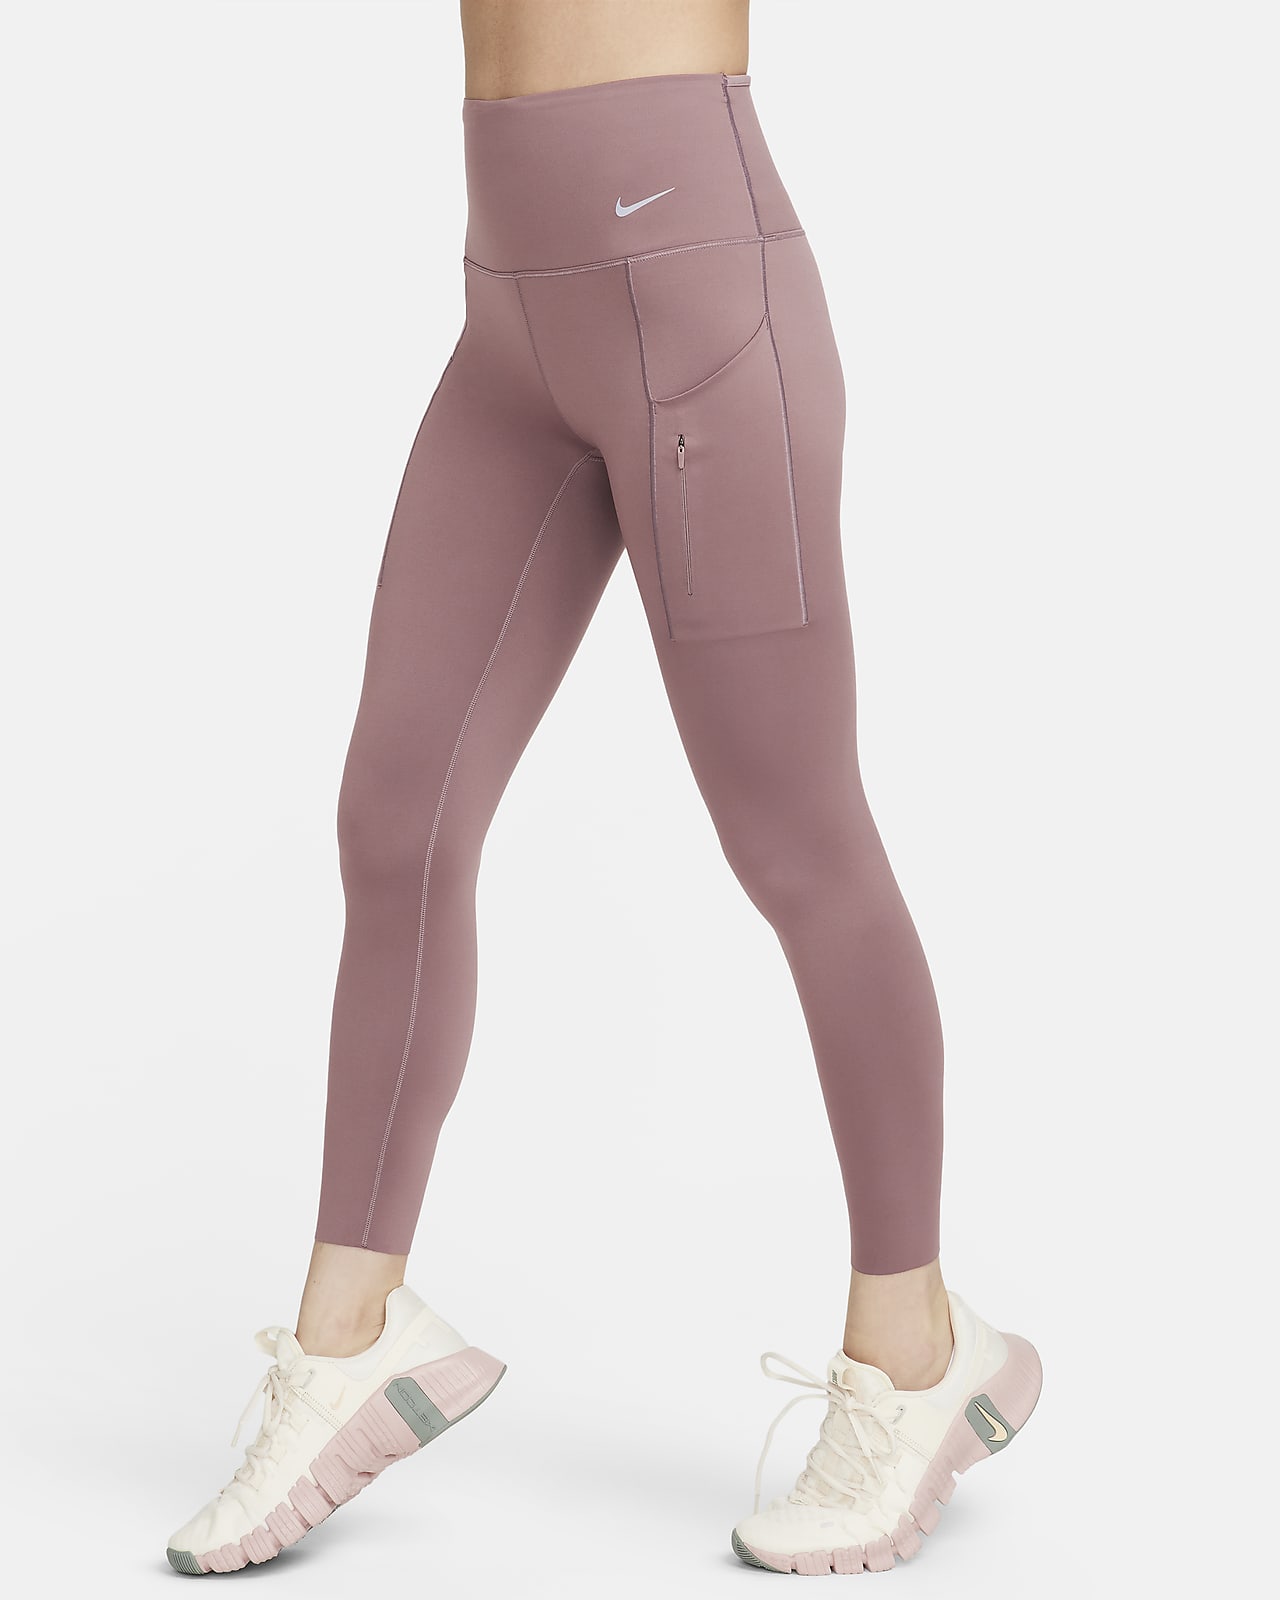 Nike Go Women's Firm-Support High-Waisted 7/8 Leggings with Pockets. Nike SG